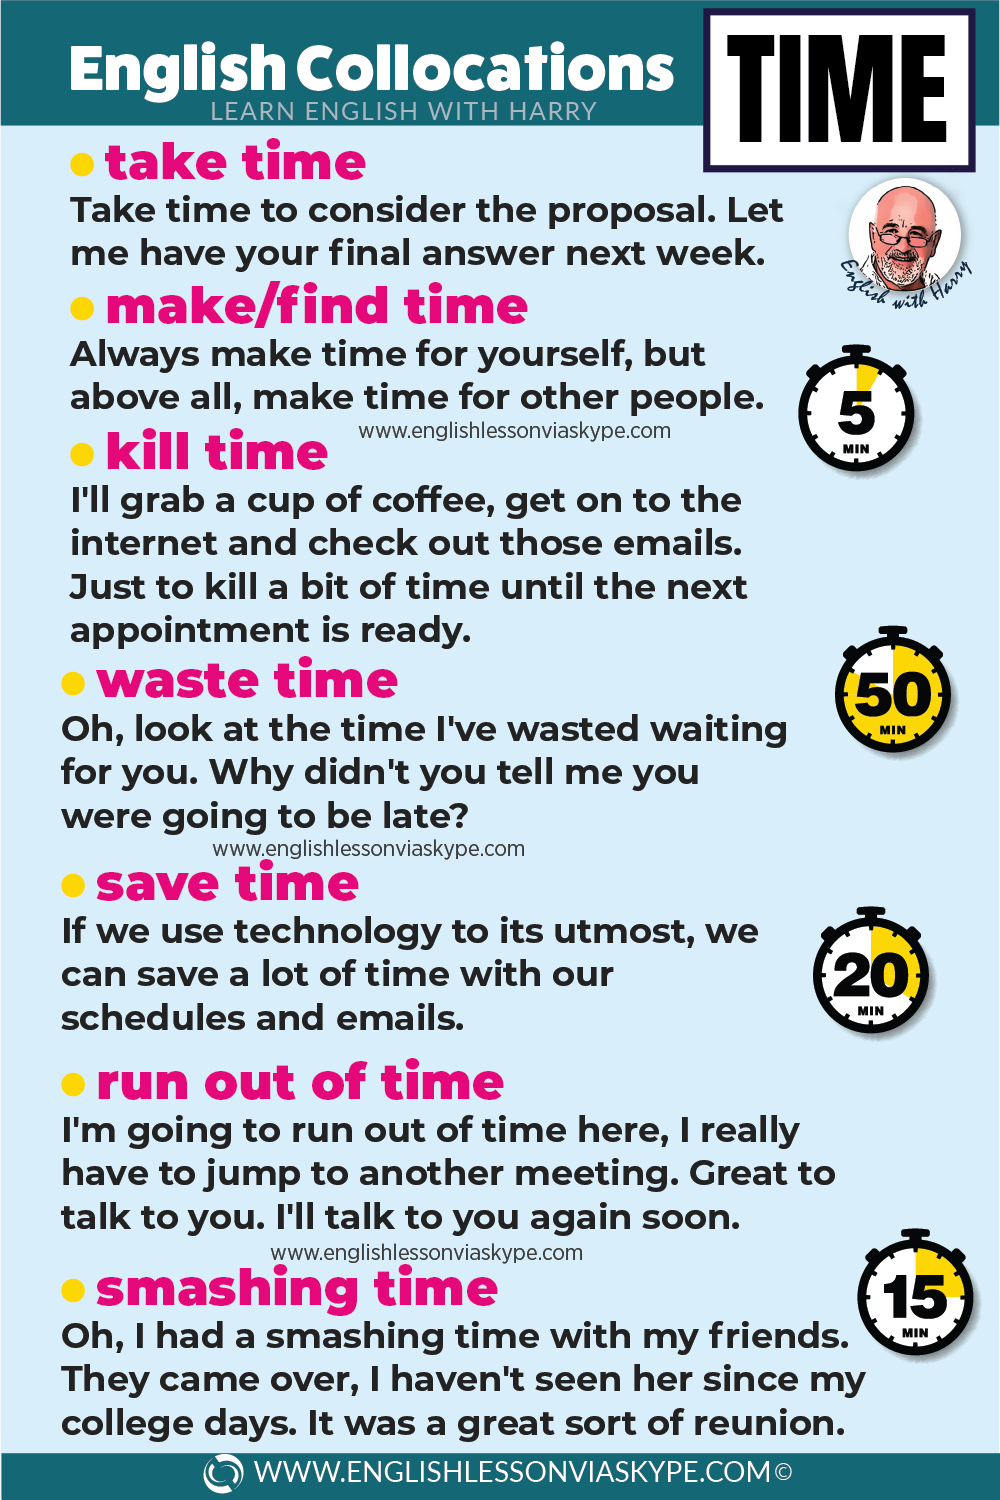 English collocations with time. Study English. Online English lessons at www.englishlessonviaskype.com. Click the link.